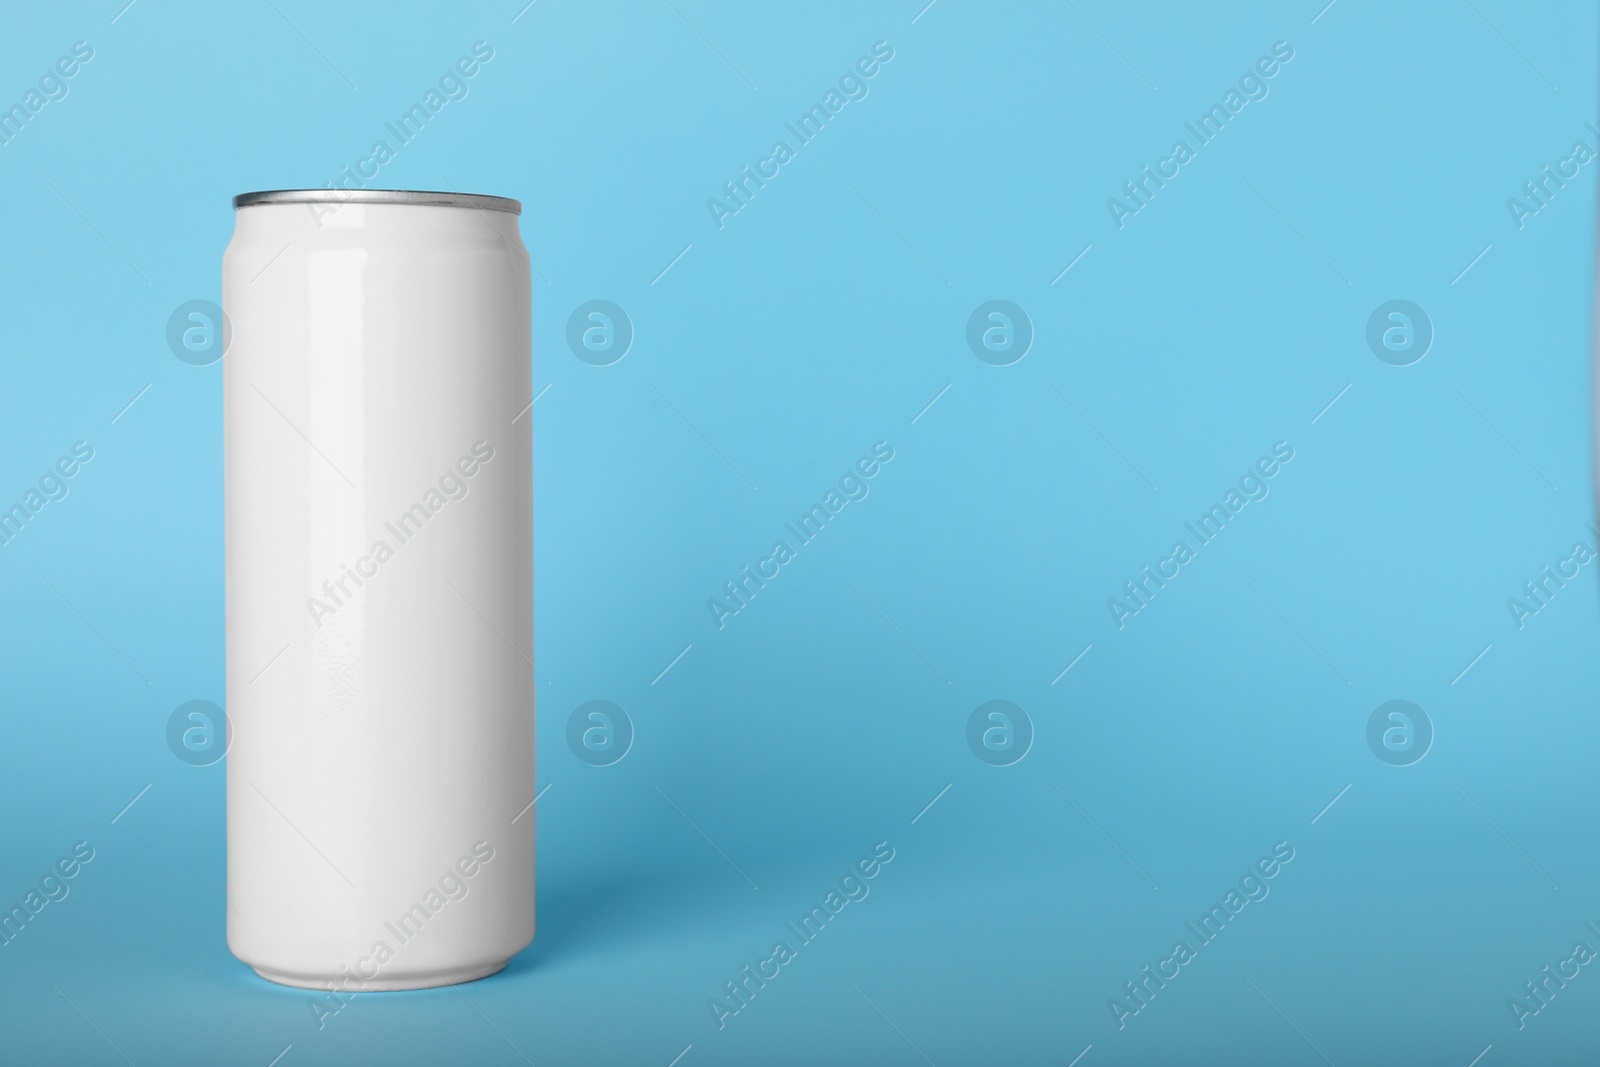 Photo of Can of energy drink on light blue background, space for text